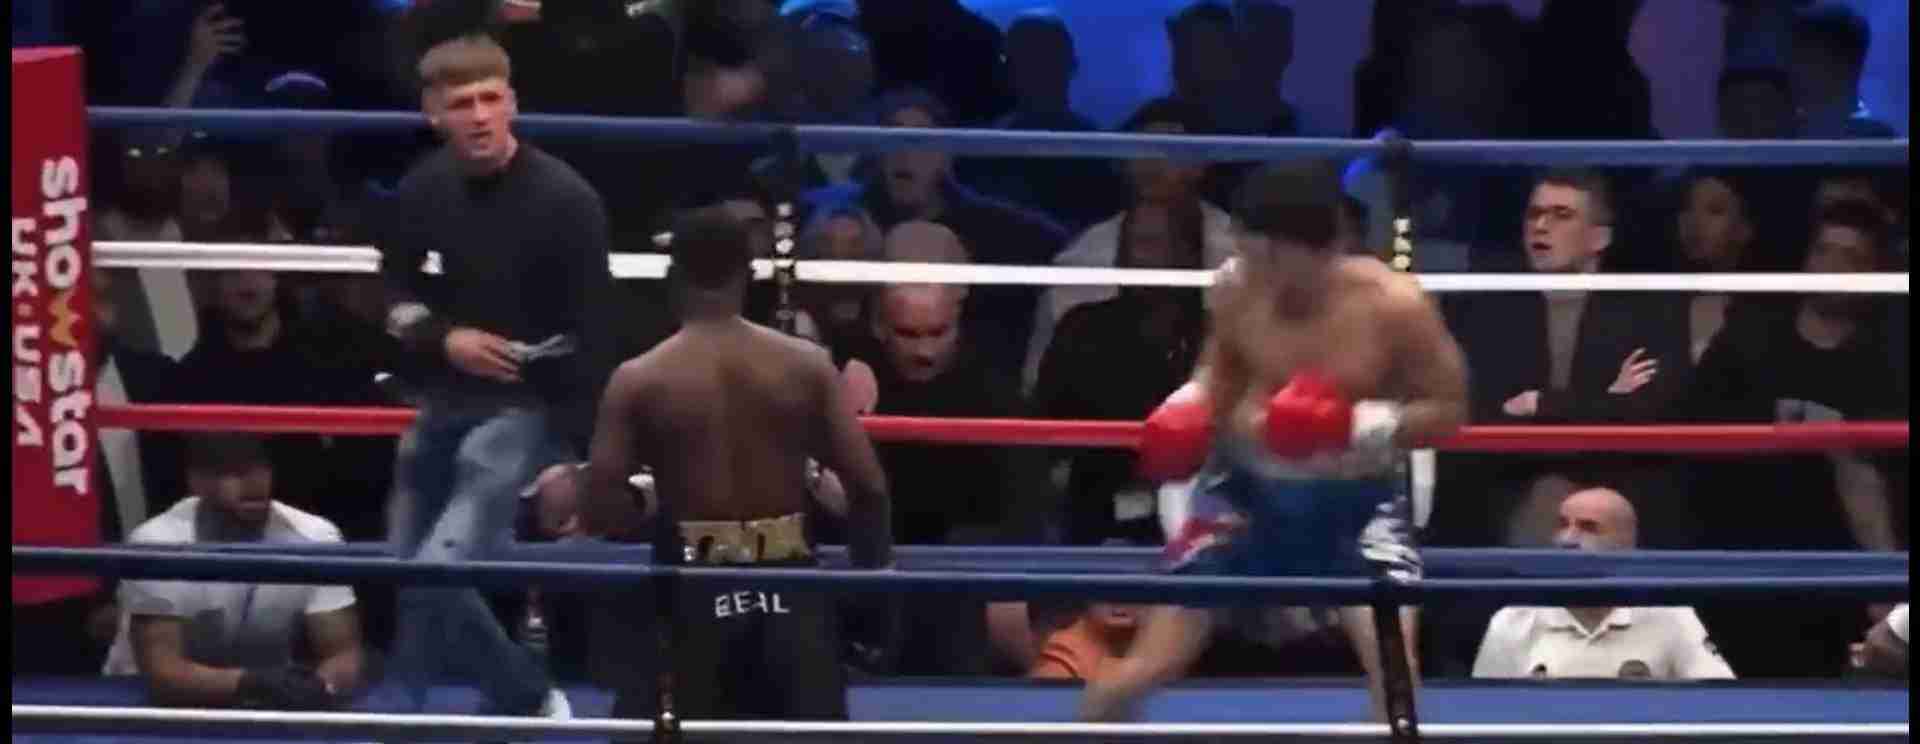 Watch: Fan enters a boxing ring disrupts fight and gets removed by staff